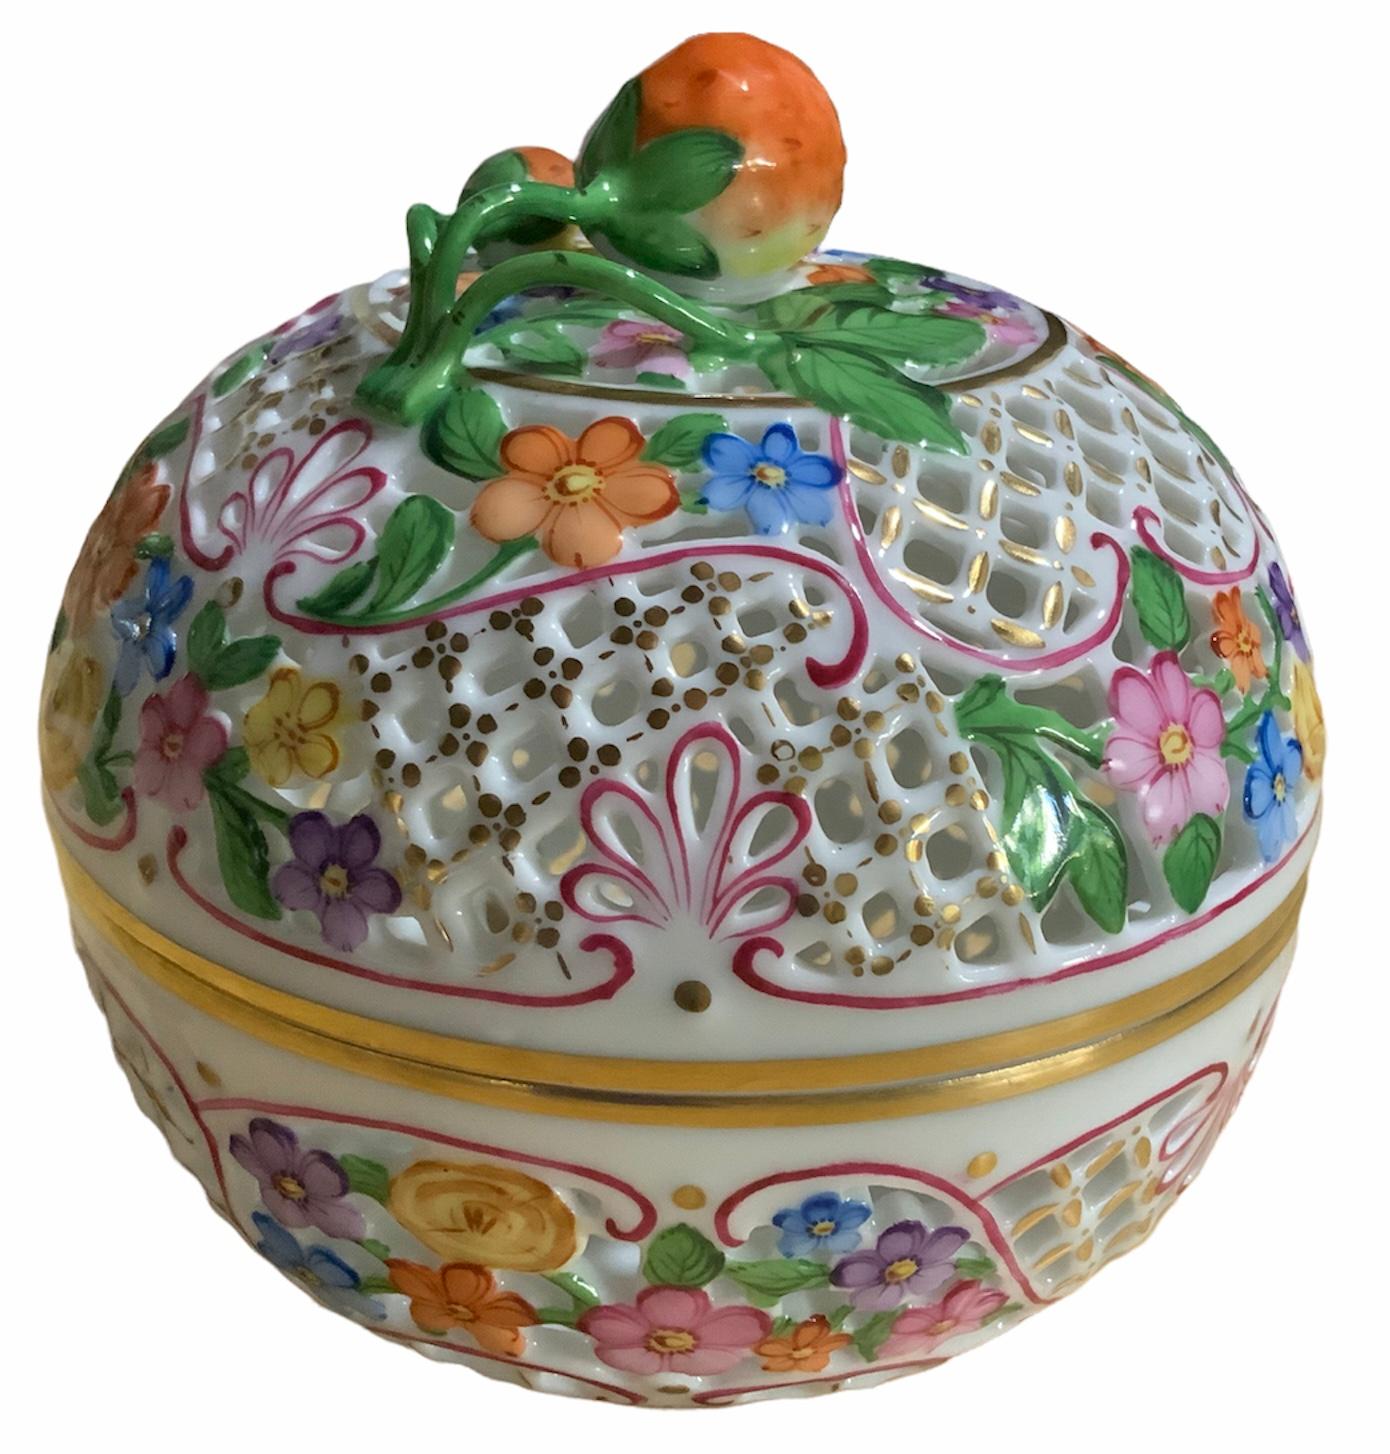 This is a Herend Porcelain reticulated round lidded potpourri bombonniere box. It is hand painted with colorful flowers and pink ribbons scrolls. Its lid and bowl borders are gilded. The lid is also decorated with a branch of two strawberries as a